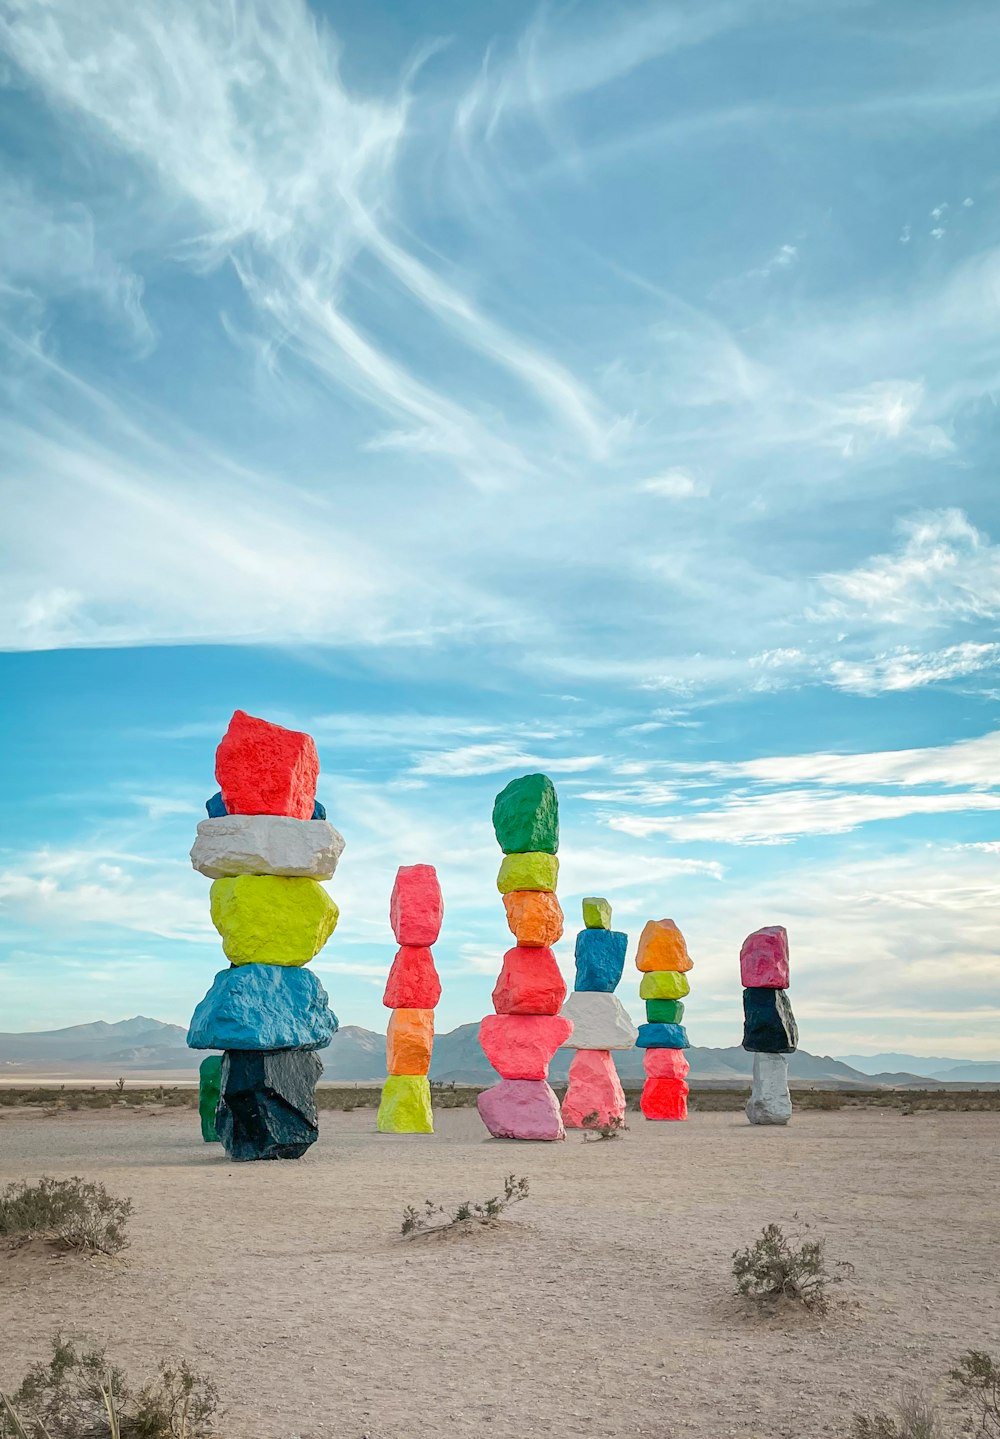 a group of sculptures in the middle of a desert